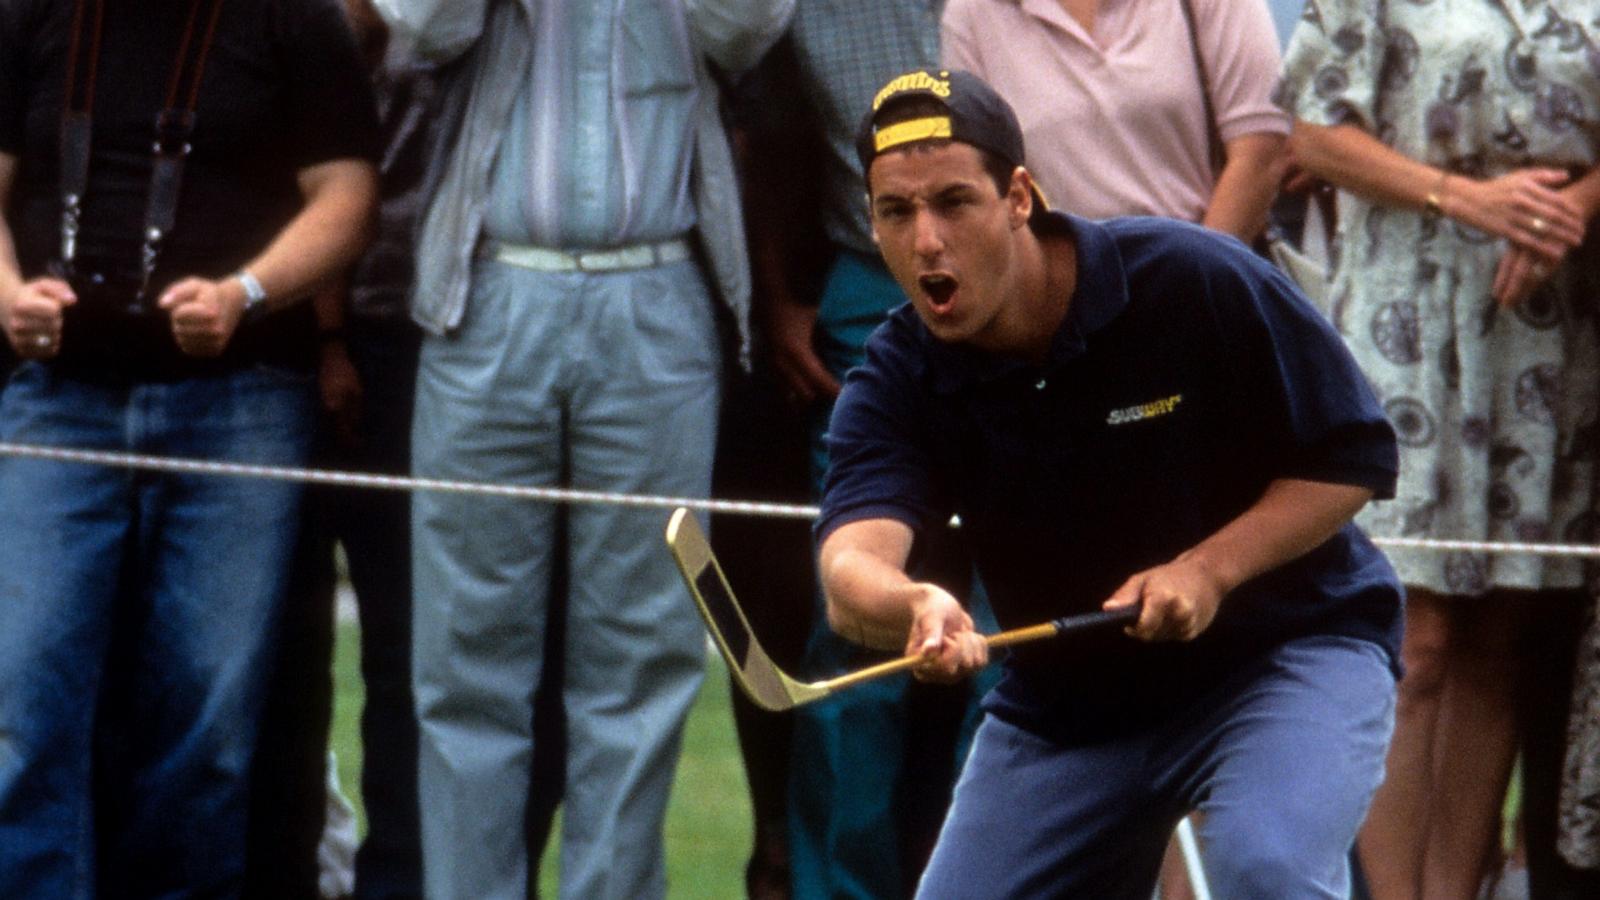 PHOTO: Adam Sandler plays golf in a scene from the film "Happy Gilmore," 1996.